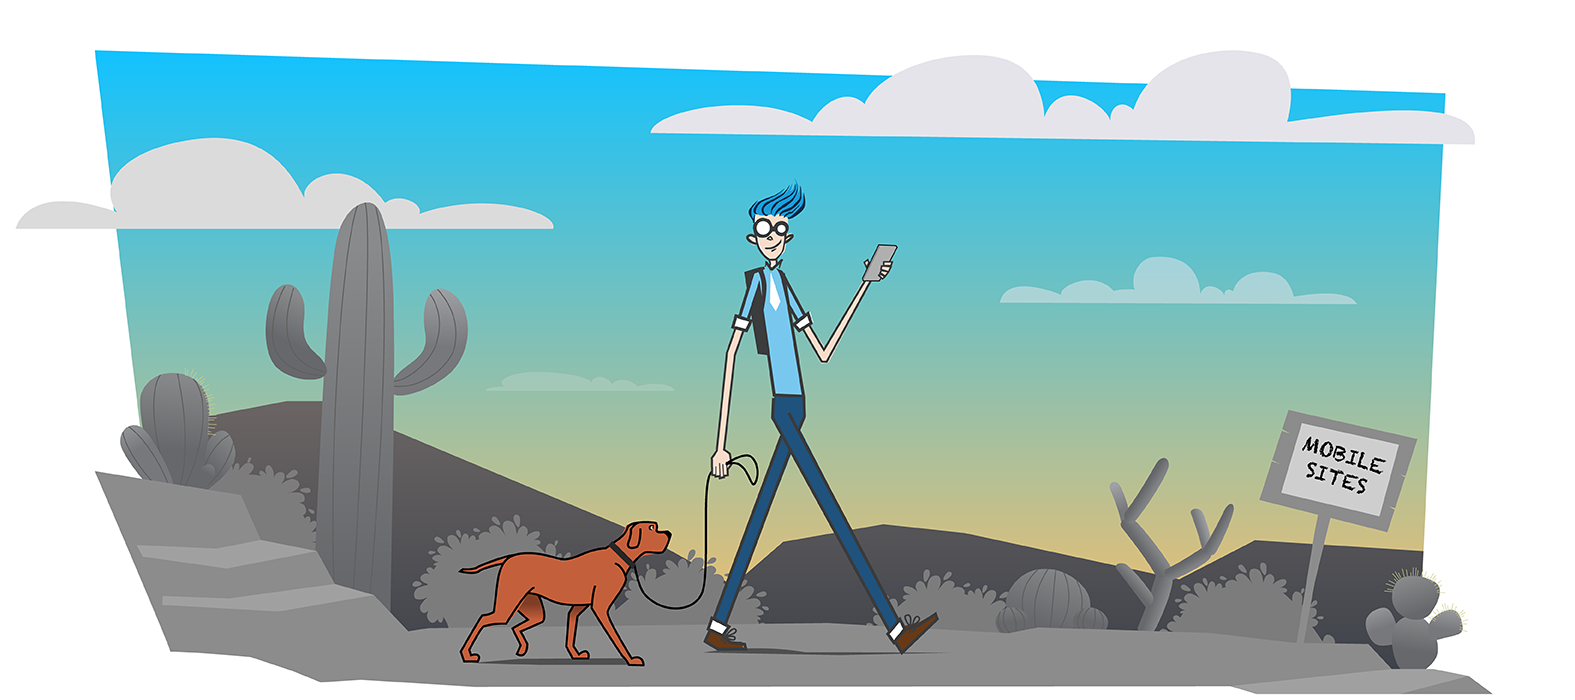 Mobile site development illustration.  Diesel character walking his dog while using a mobile site on his phone.